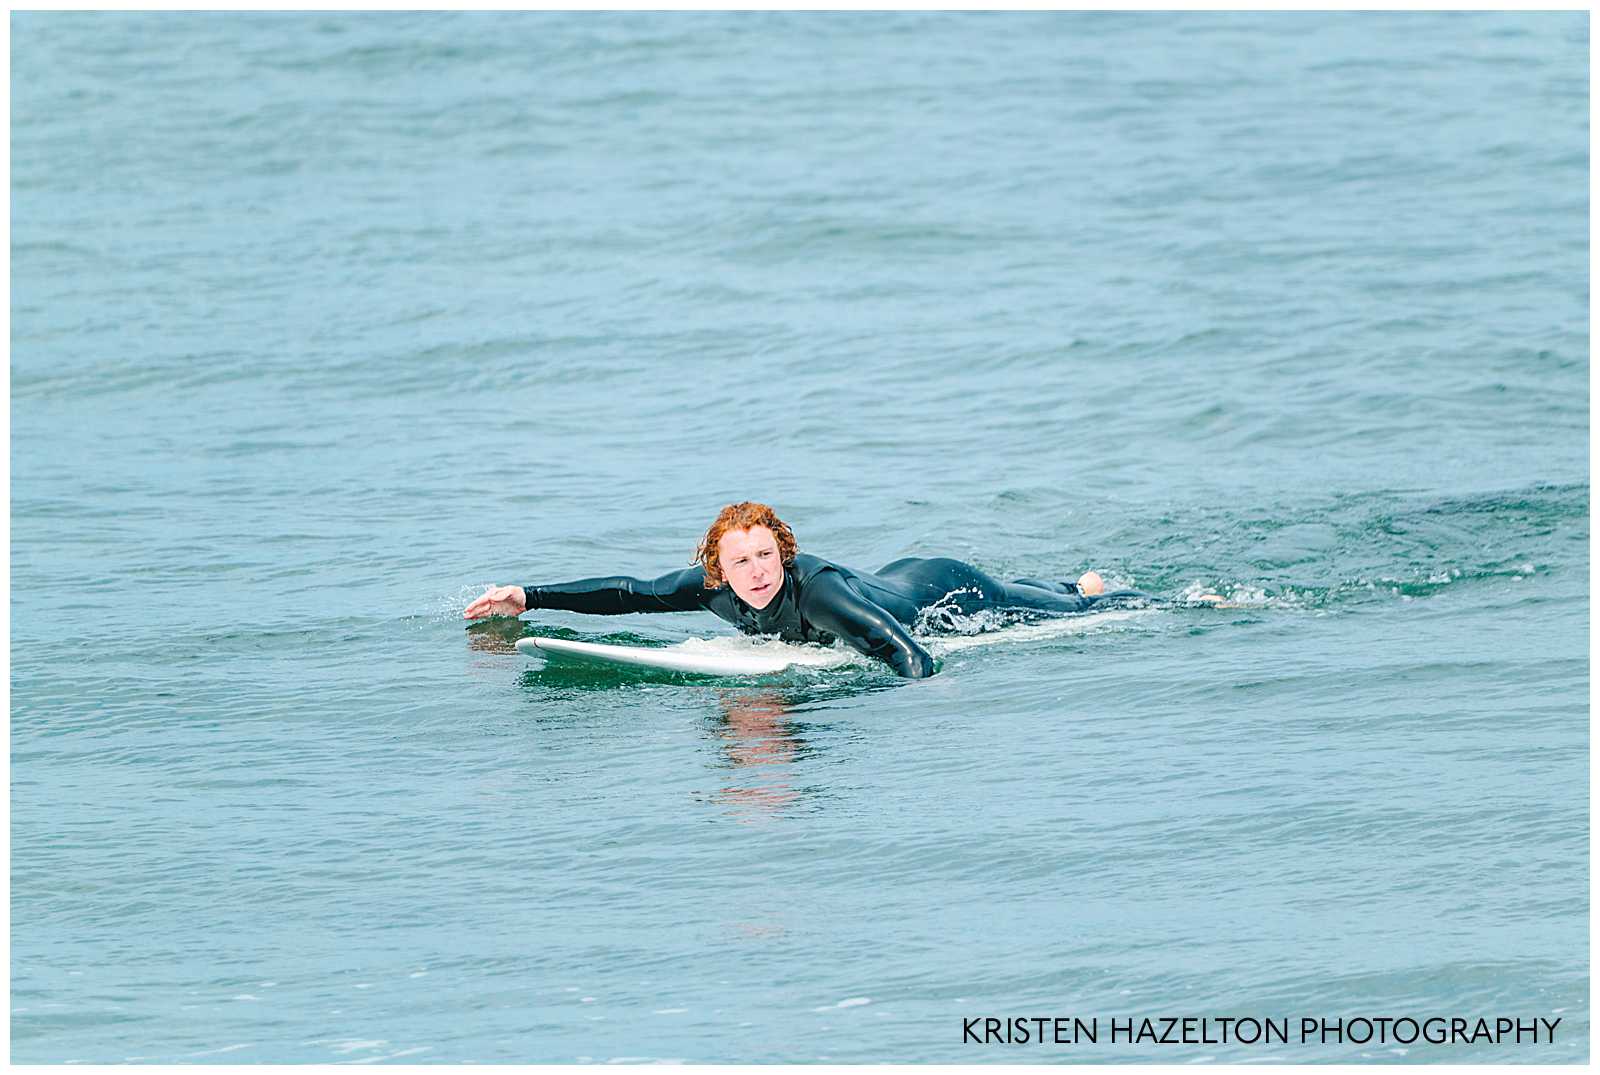 Redheaded man paddling to catch a wave while surfing. Surfing photography by Kristen Hazelton.